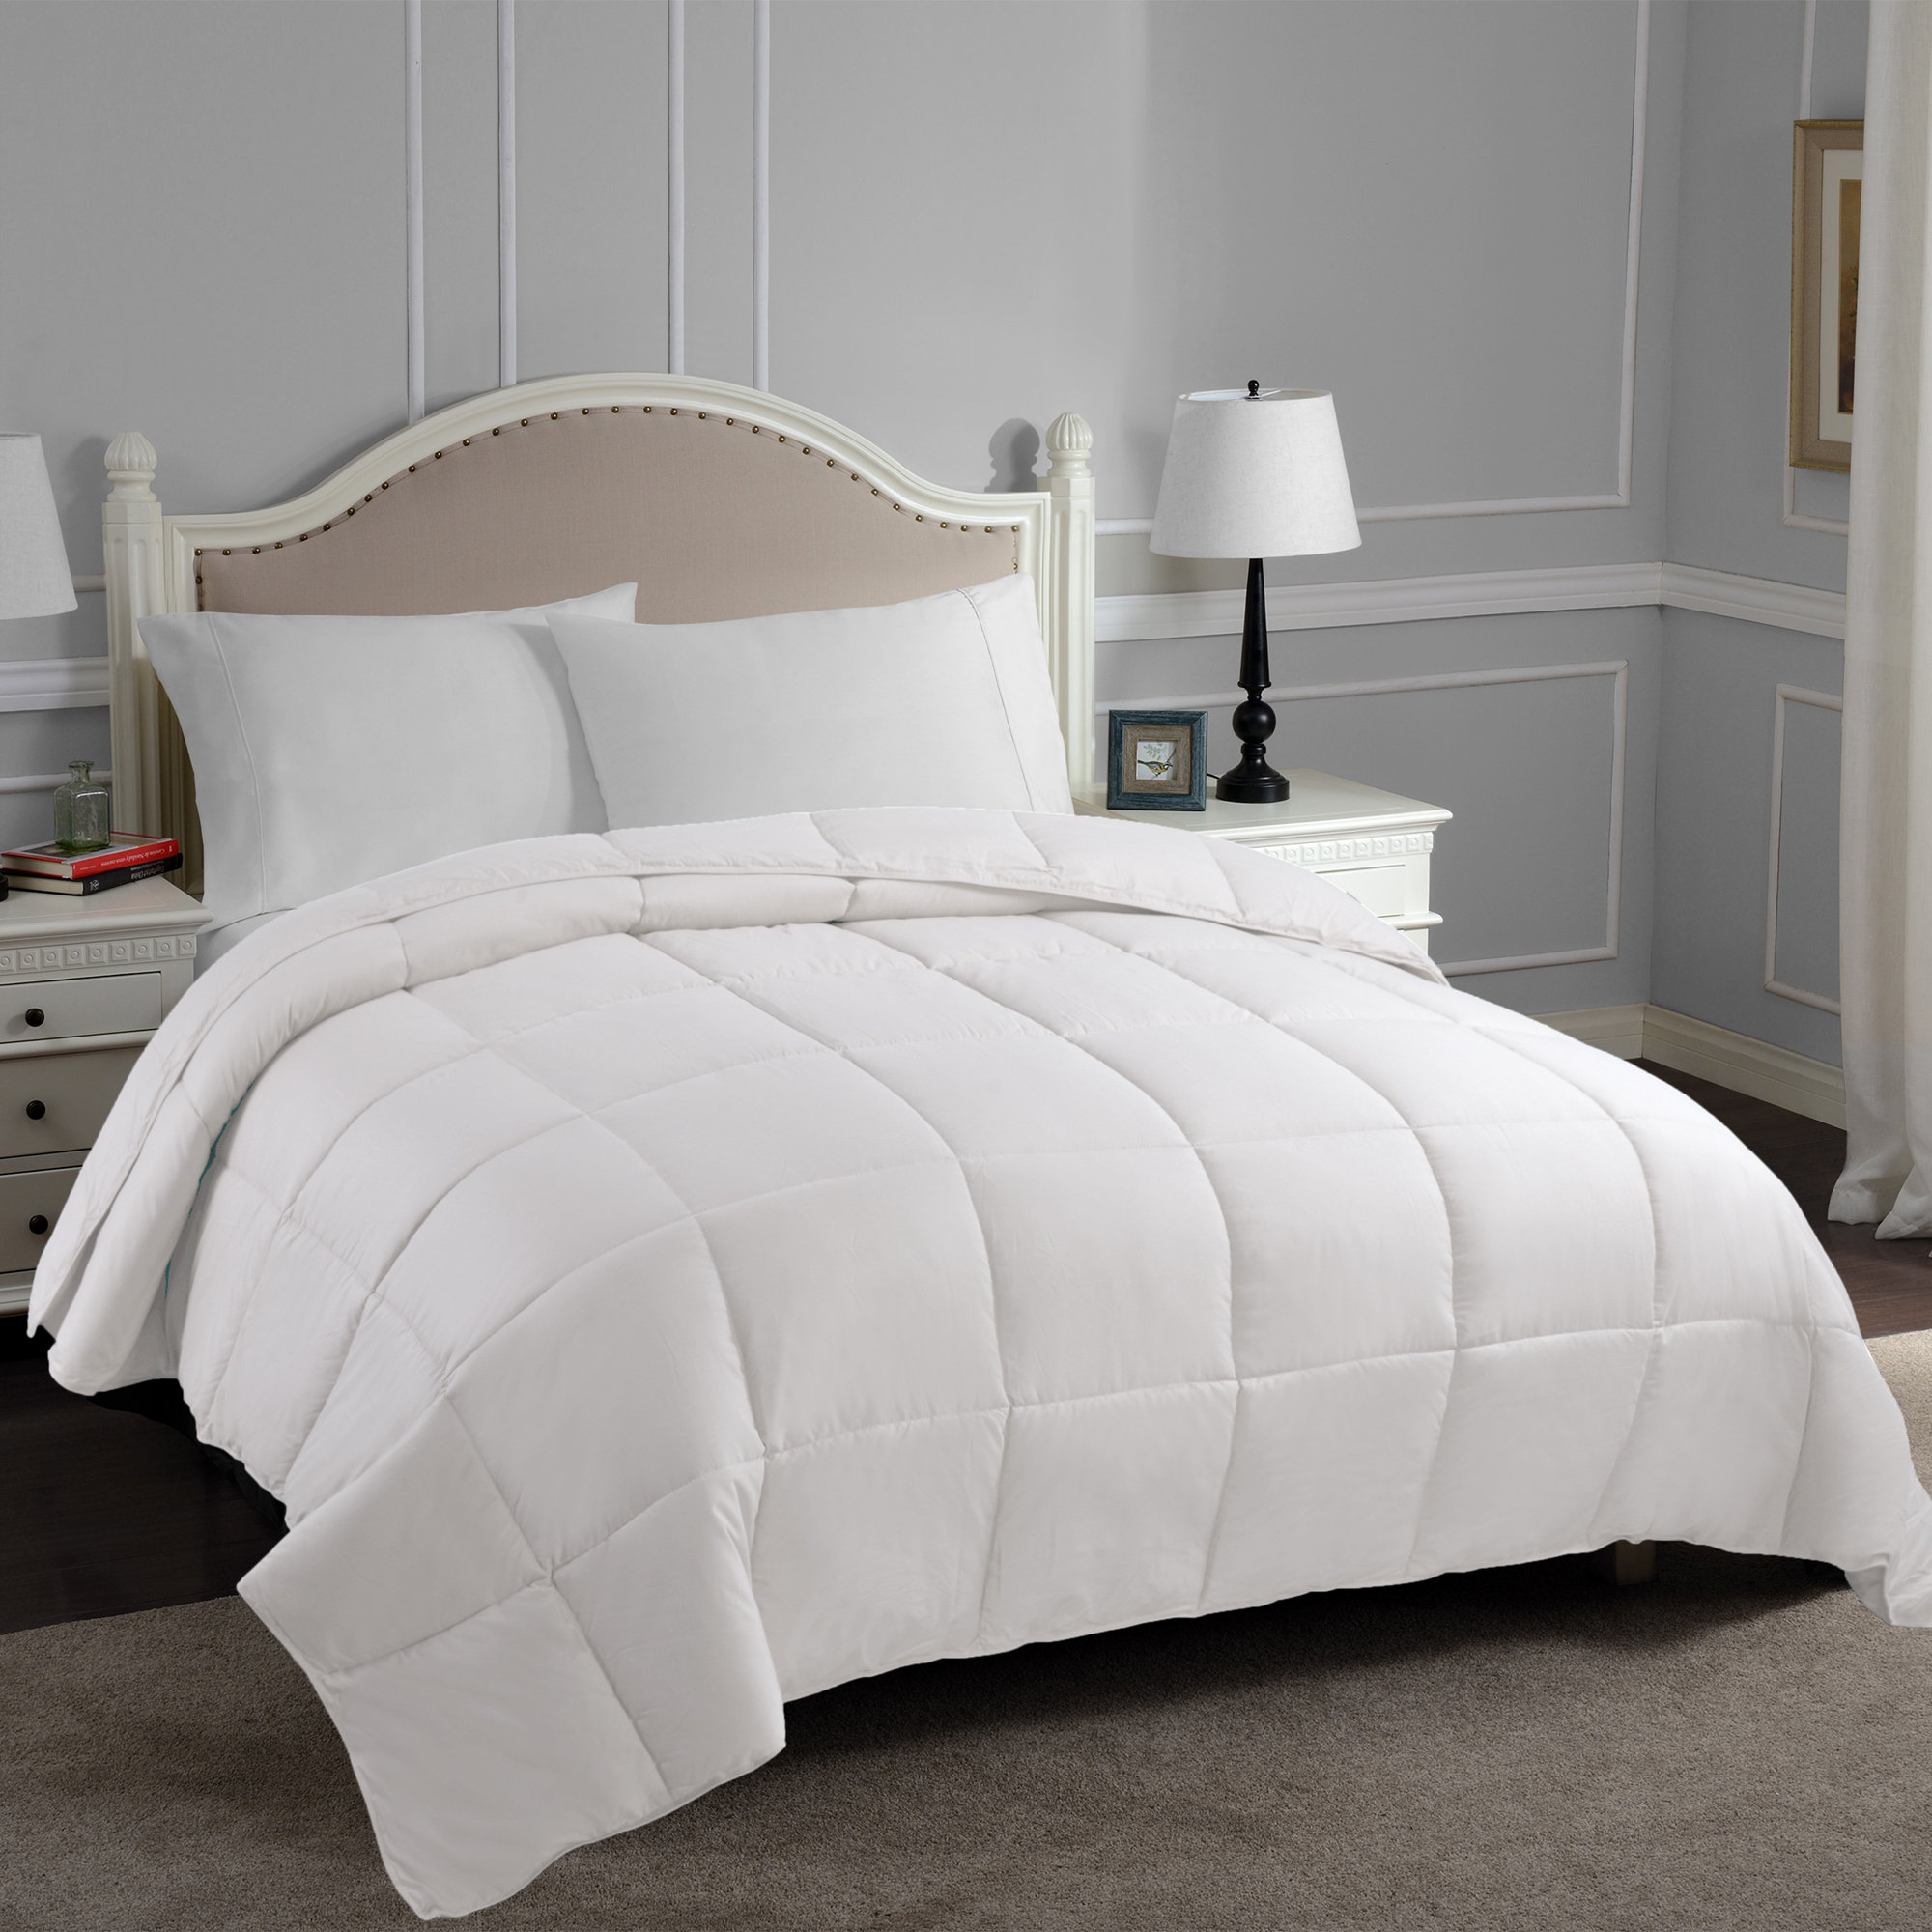 Queen's House White Ruffles Bed Sheets Set Cotton Queen Size Sheets-Style G